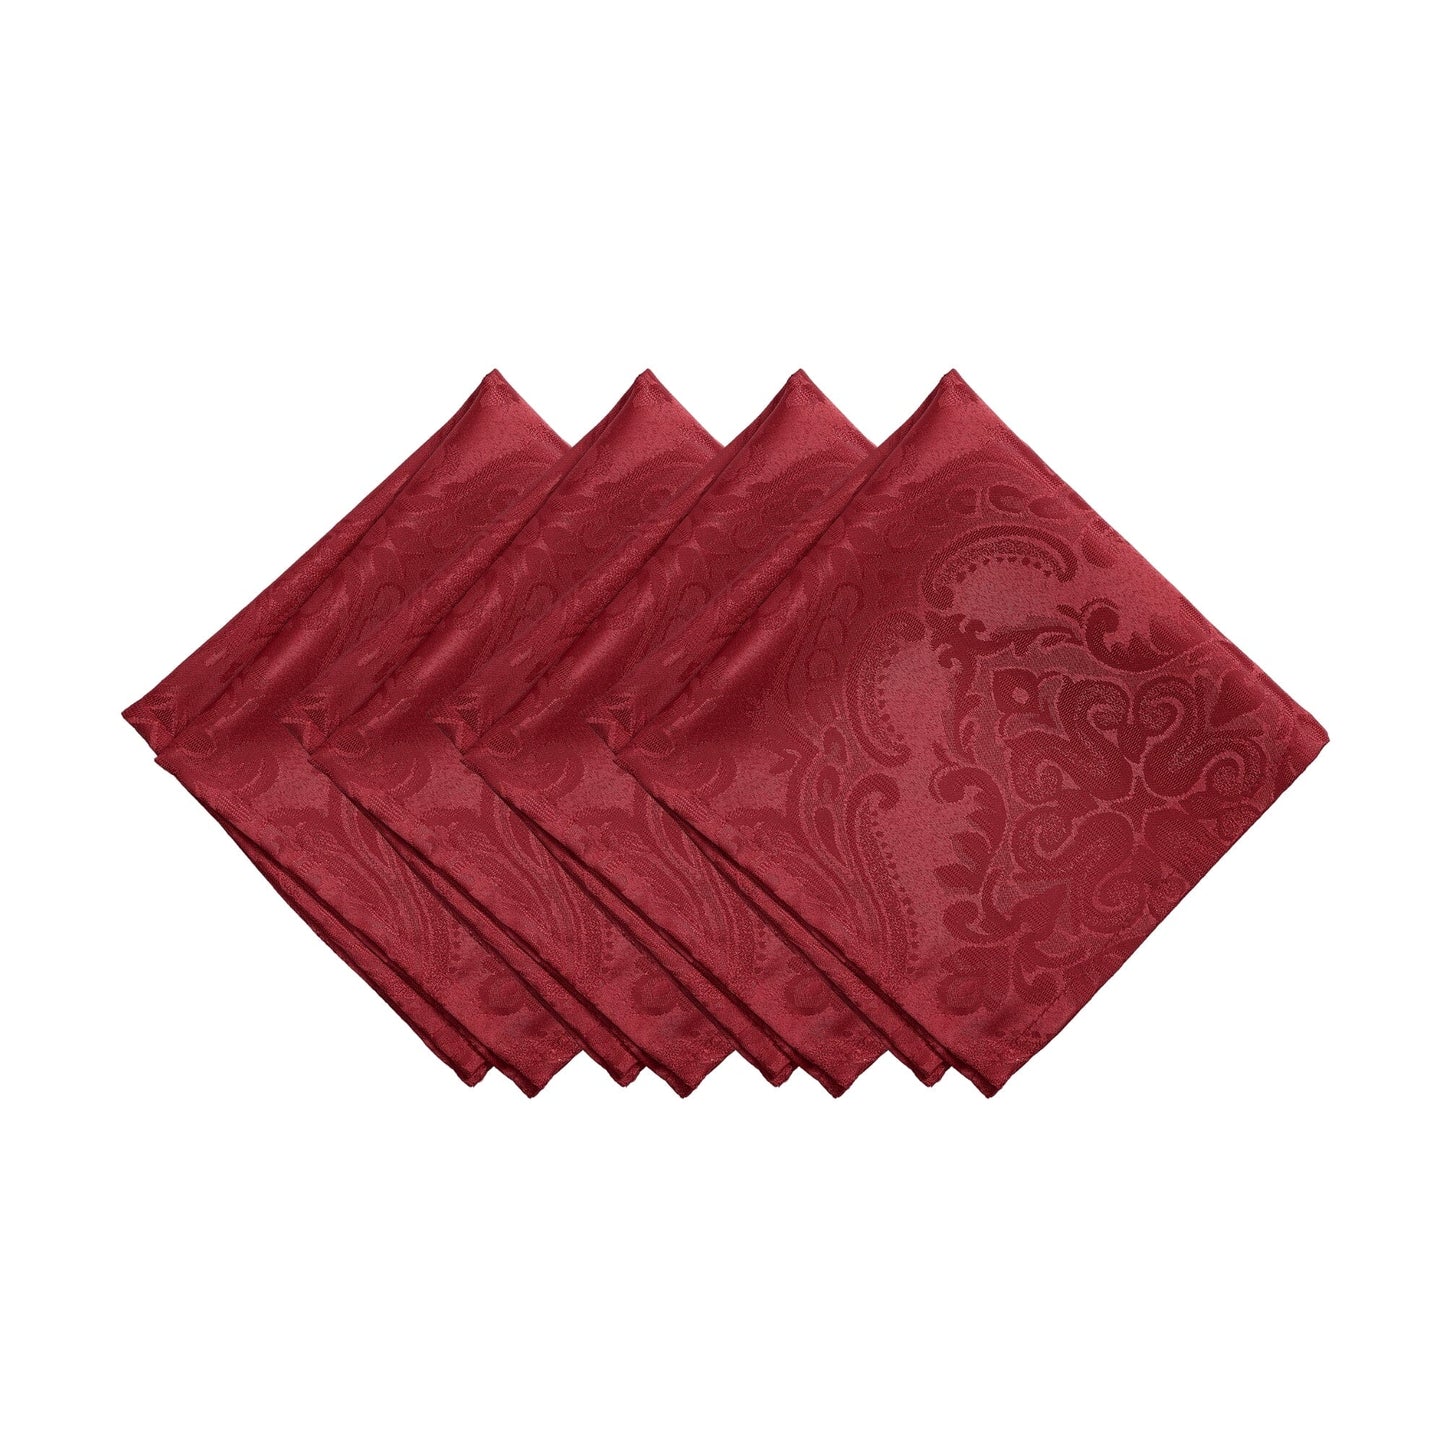 Caiden Elegance Damask Water and Stain Resistant Napkins, Set of 4